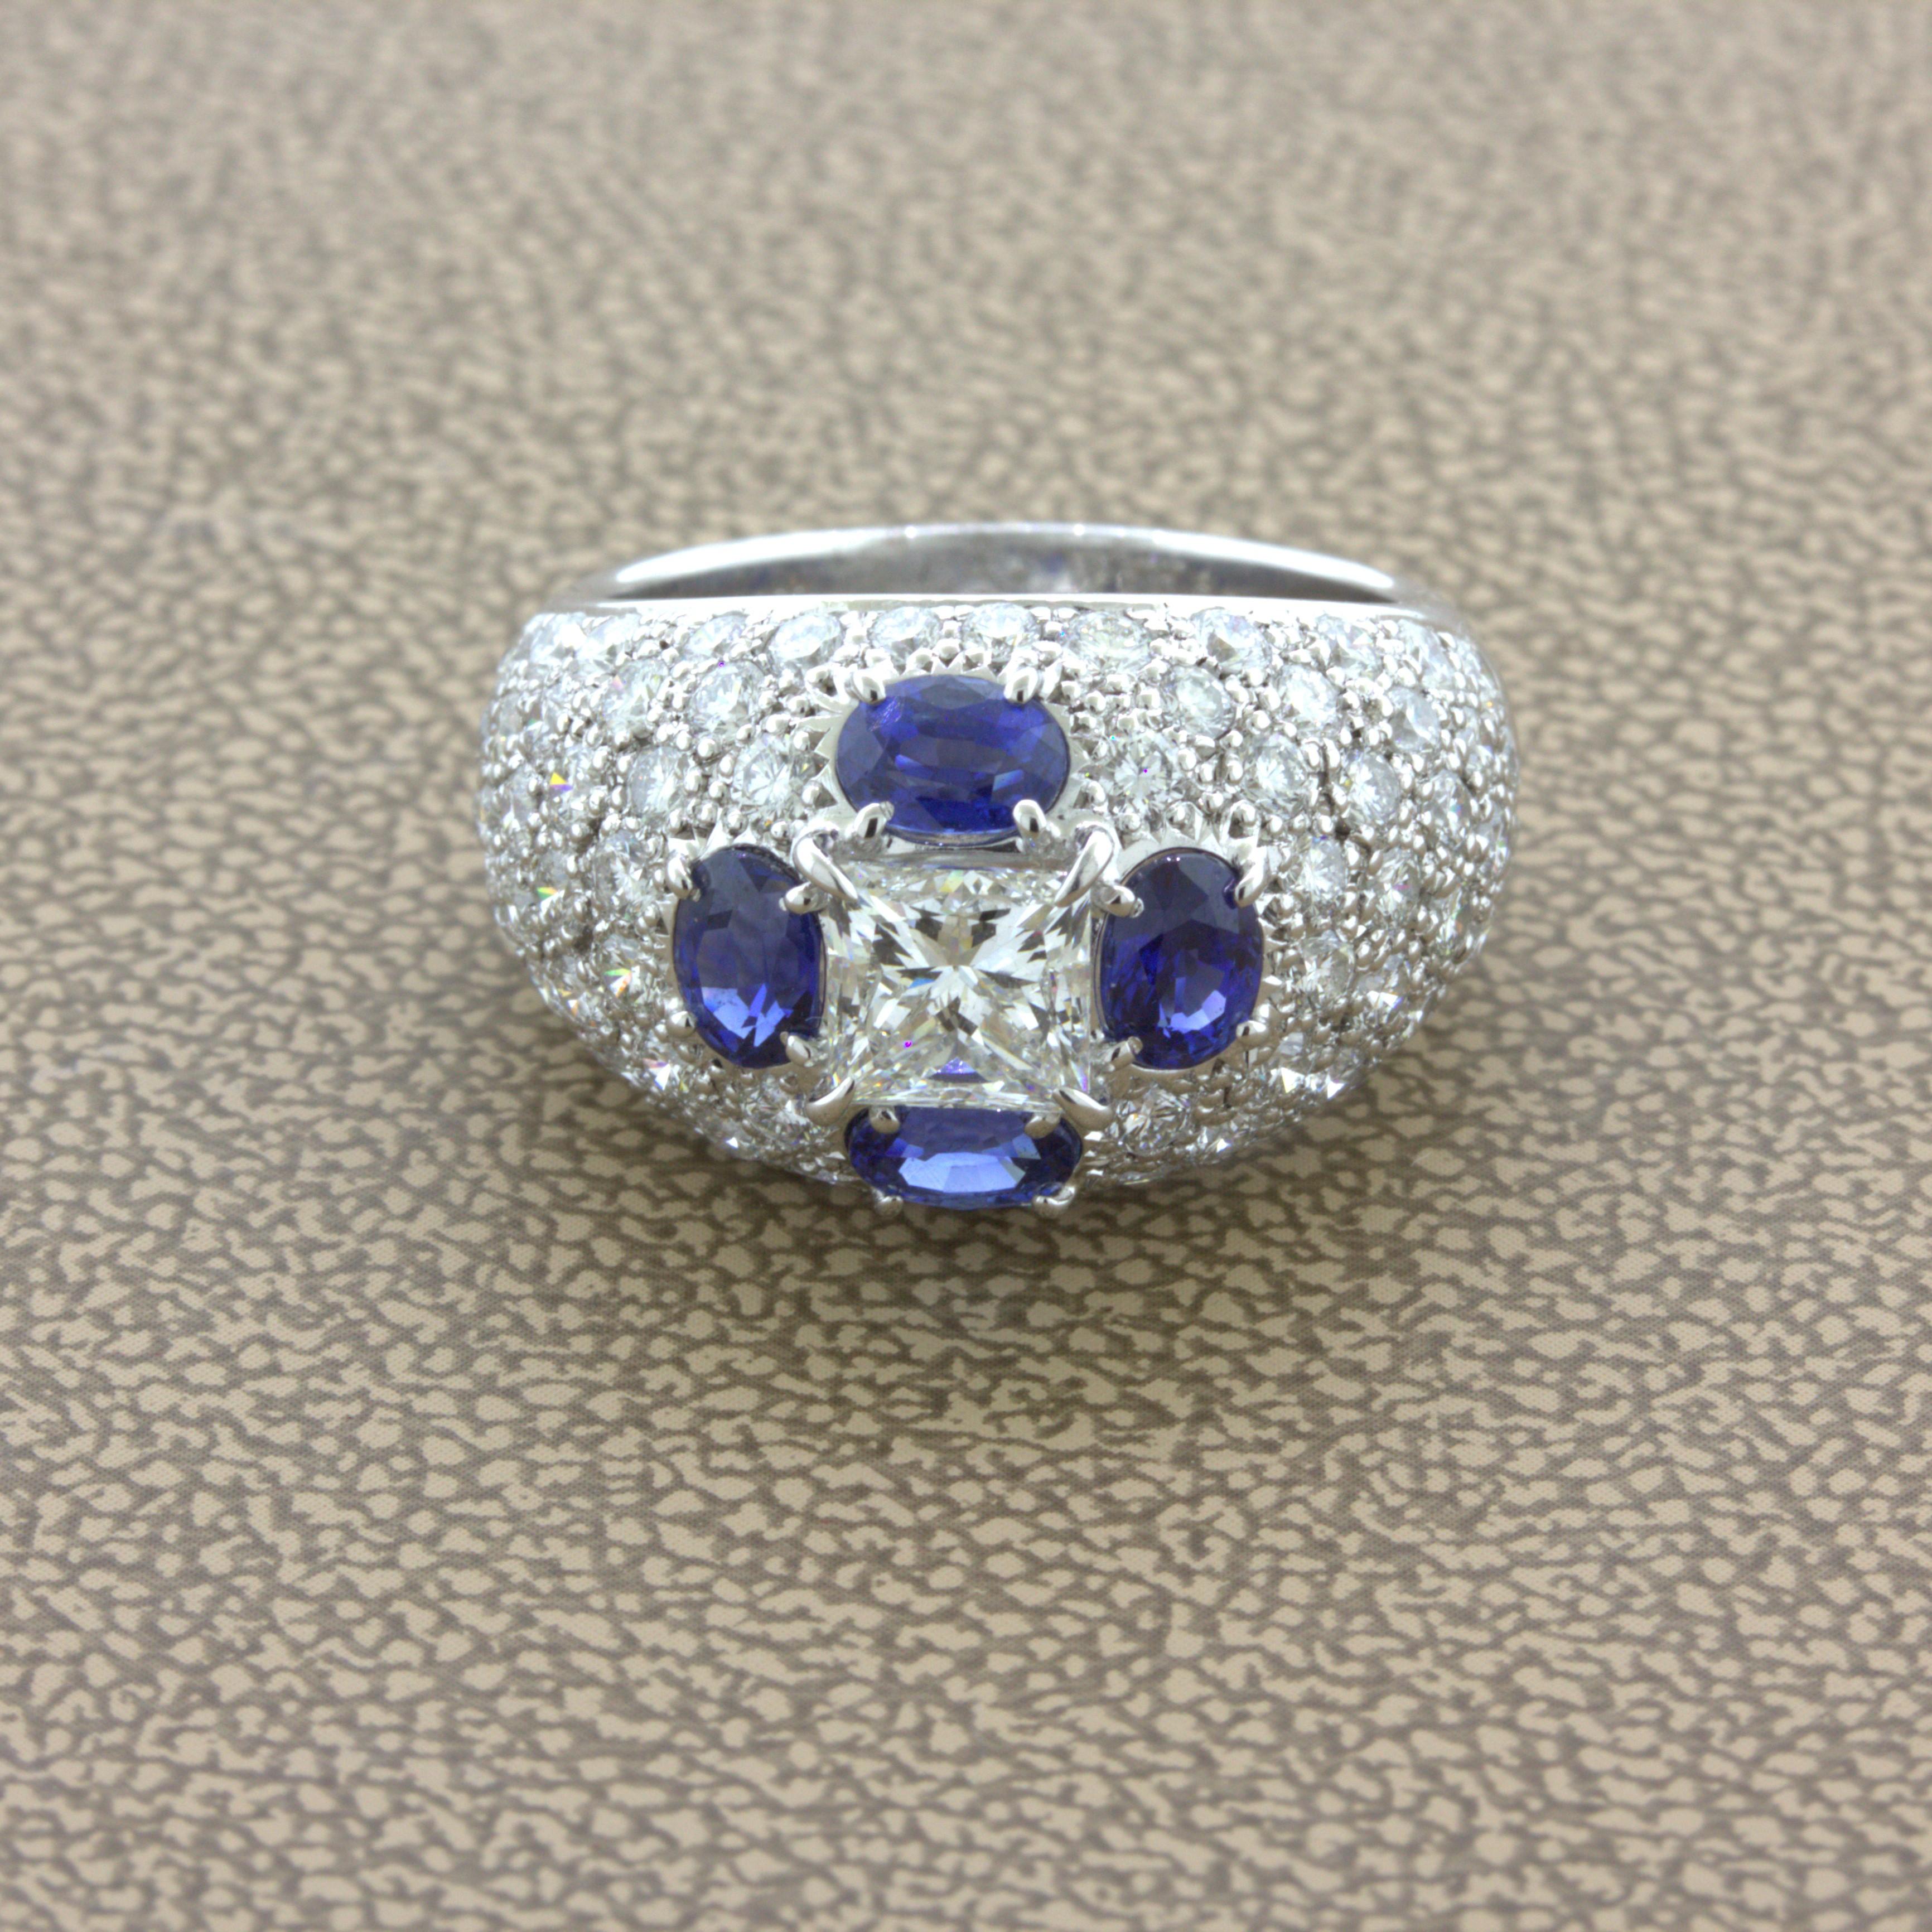 A chic and elegant platinum ring featuring a 1.02 carat princess-cut diamond! It has a G-H color and is eye-clean with no visible inclusions, a very fine quality stone. It is complemented by 4 oval-shaped blue sapphires, weighing 1.66 carats,